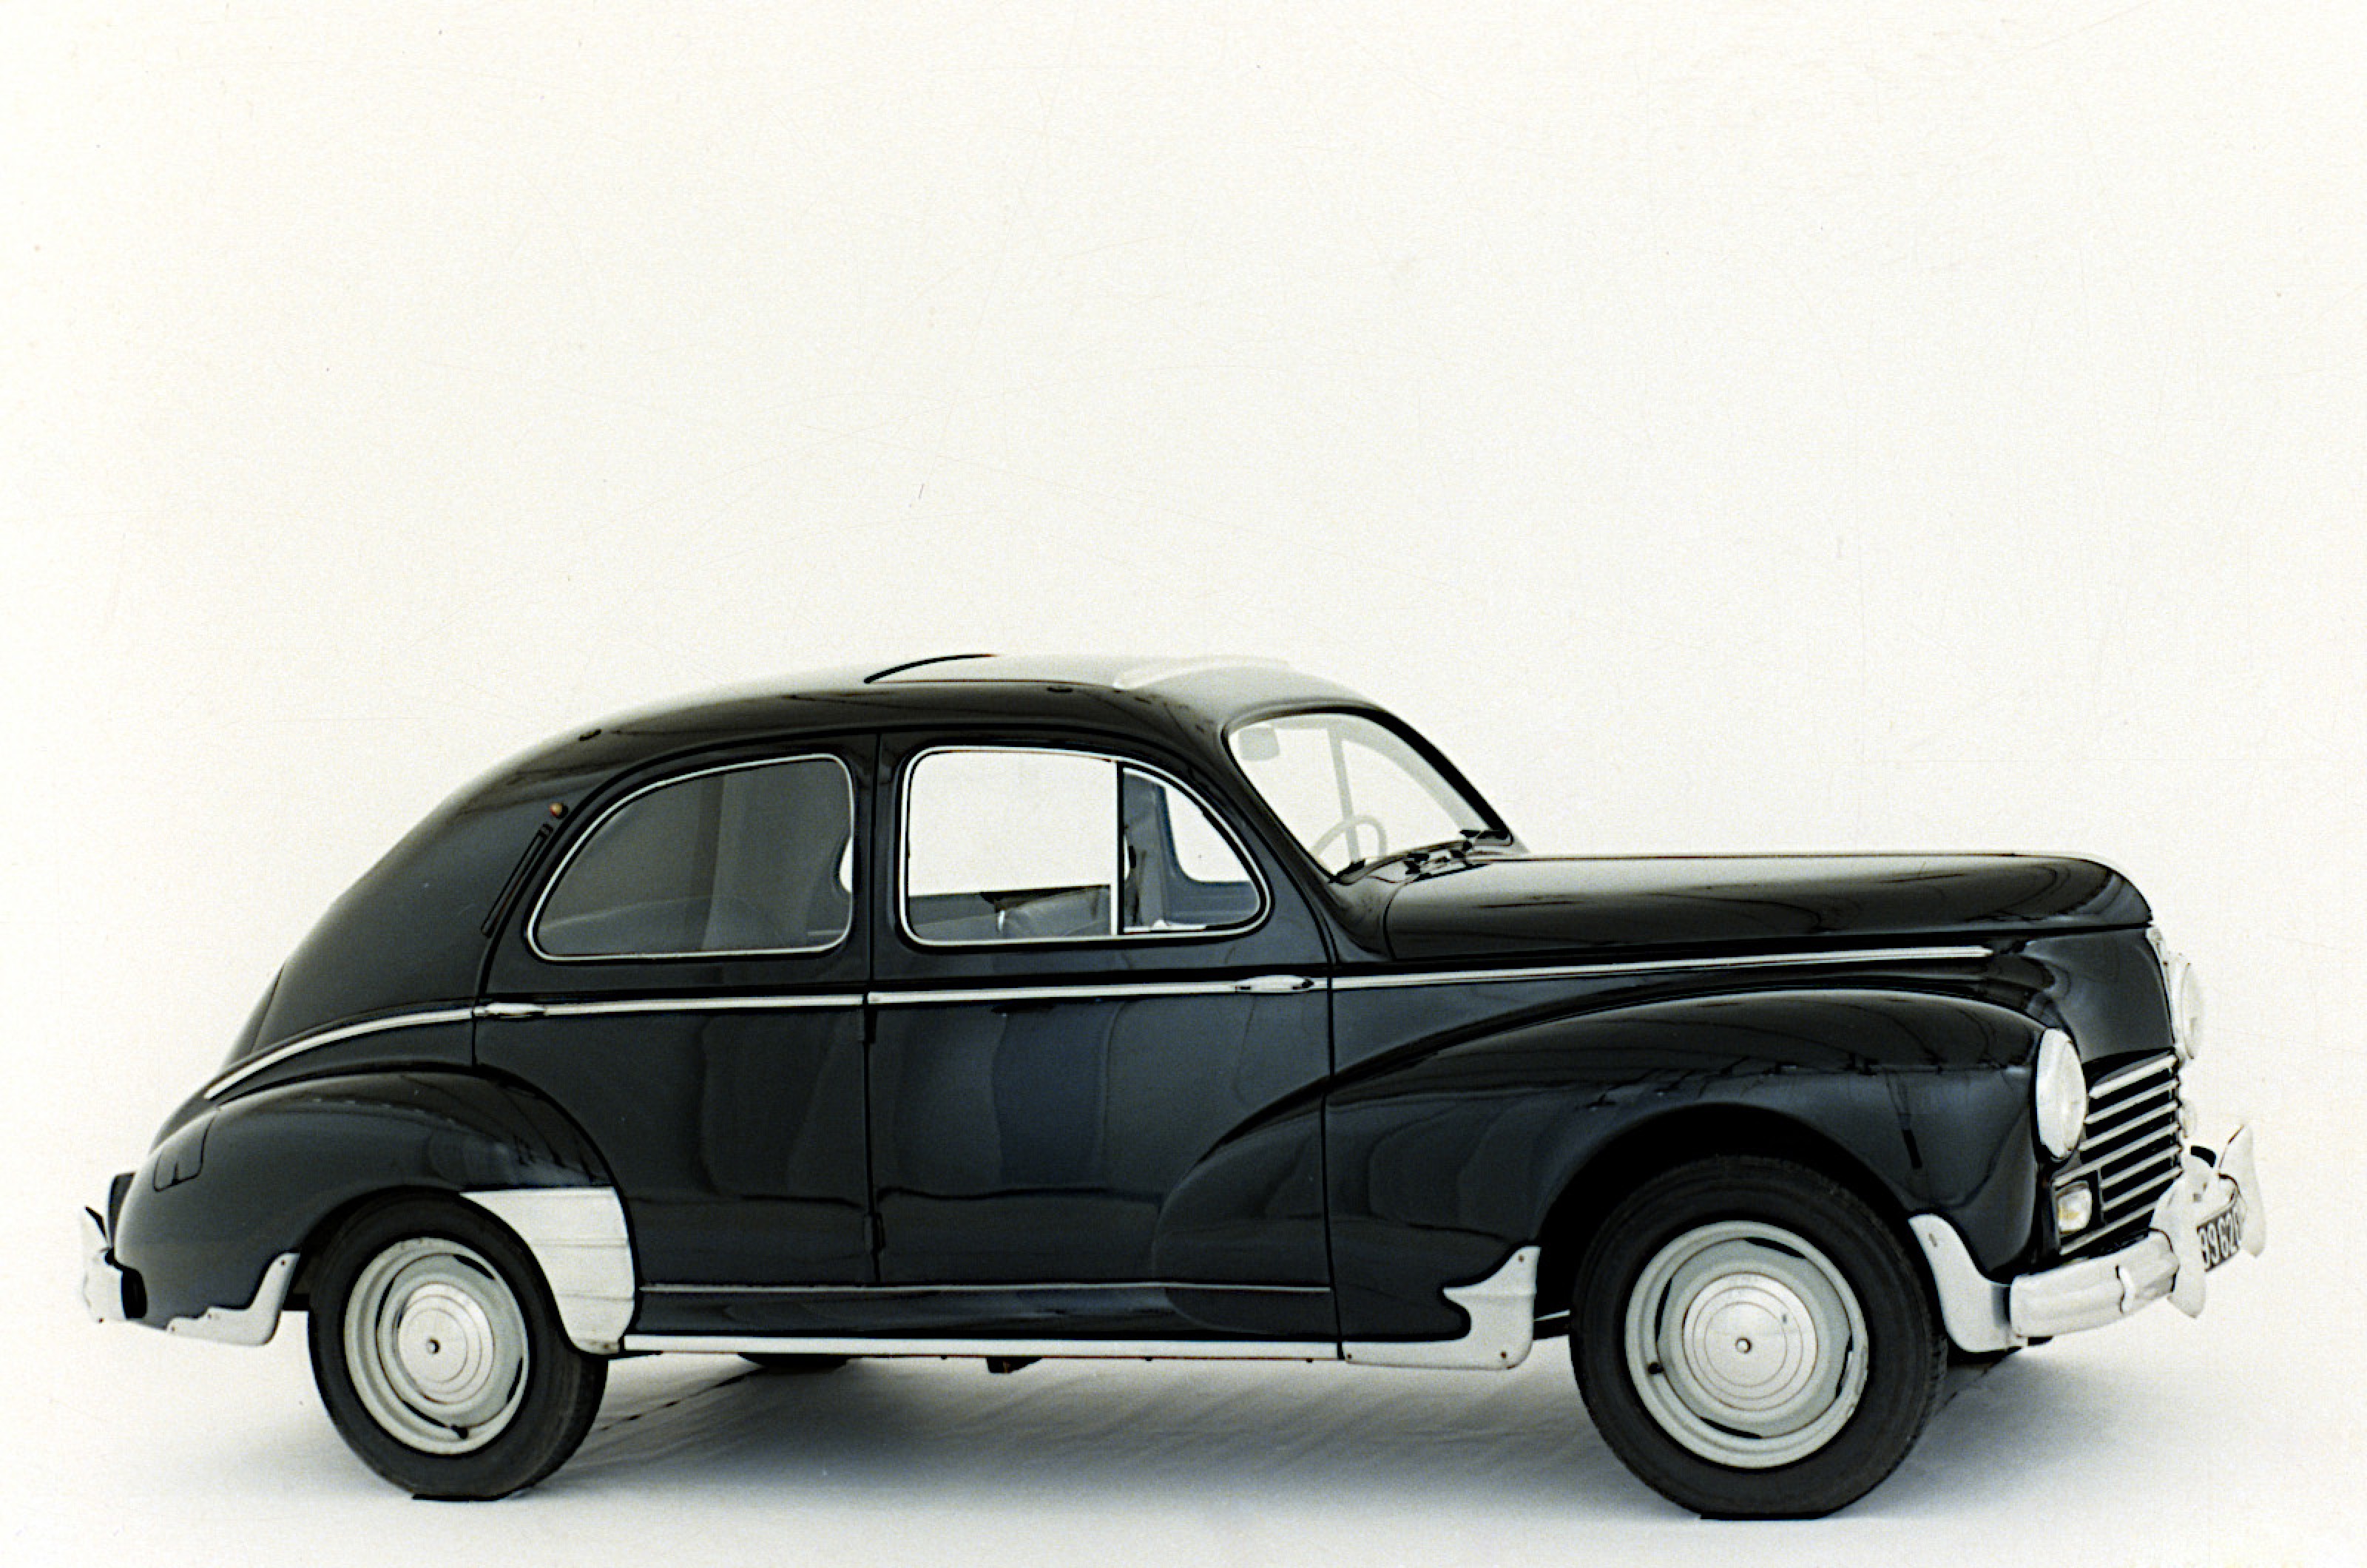 <p>In what must now be sounding like a familiar story, the 203 was Peugeot’s first model introduced after the Second World War, and the first with unibody construction.</p>  <p>Once again, the American cars introduced before the US entered the conflict exerted an influence – the domed hood was there, as were the front fenders whose shape continued into the doors.</p>  <p>The 203 was available in several body styles, but the sedan is notable for its fastback-like tail, which was similar to a design used for some versions of the influential Chevy Fleetline.</p>  <p>Unusually, Peugeot continued producing the 203 without major styling changes all the way until 1960, by which time the other European manufacturers had long since moved on to more modern designs.</p>